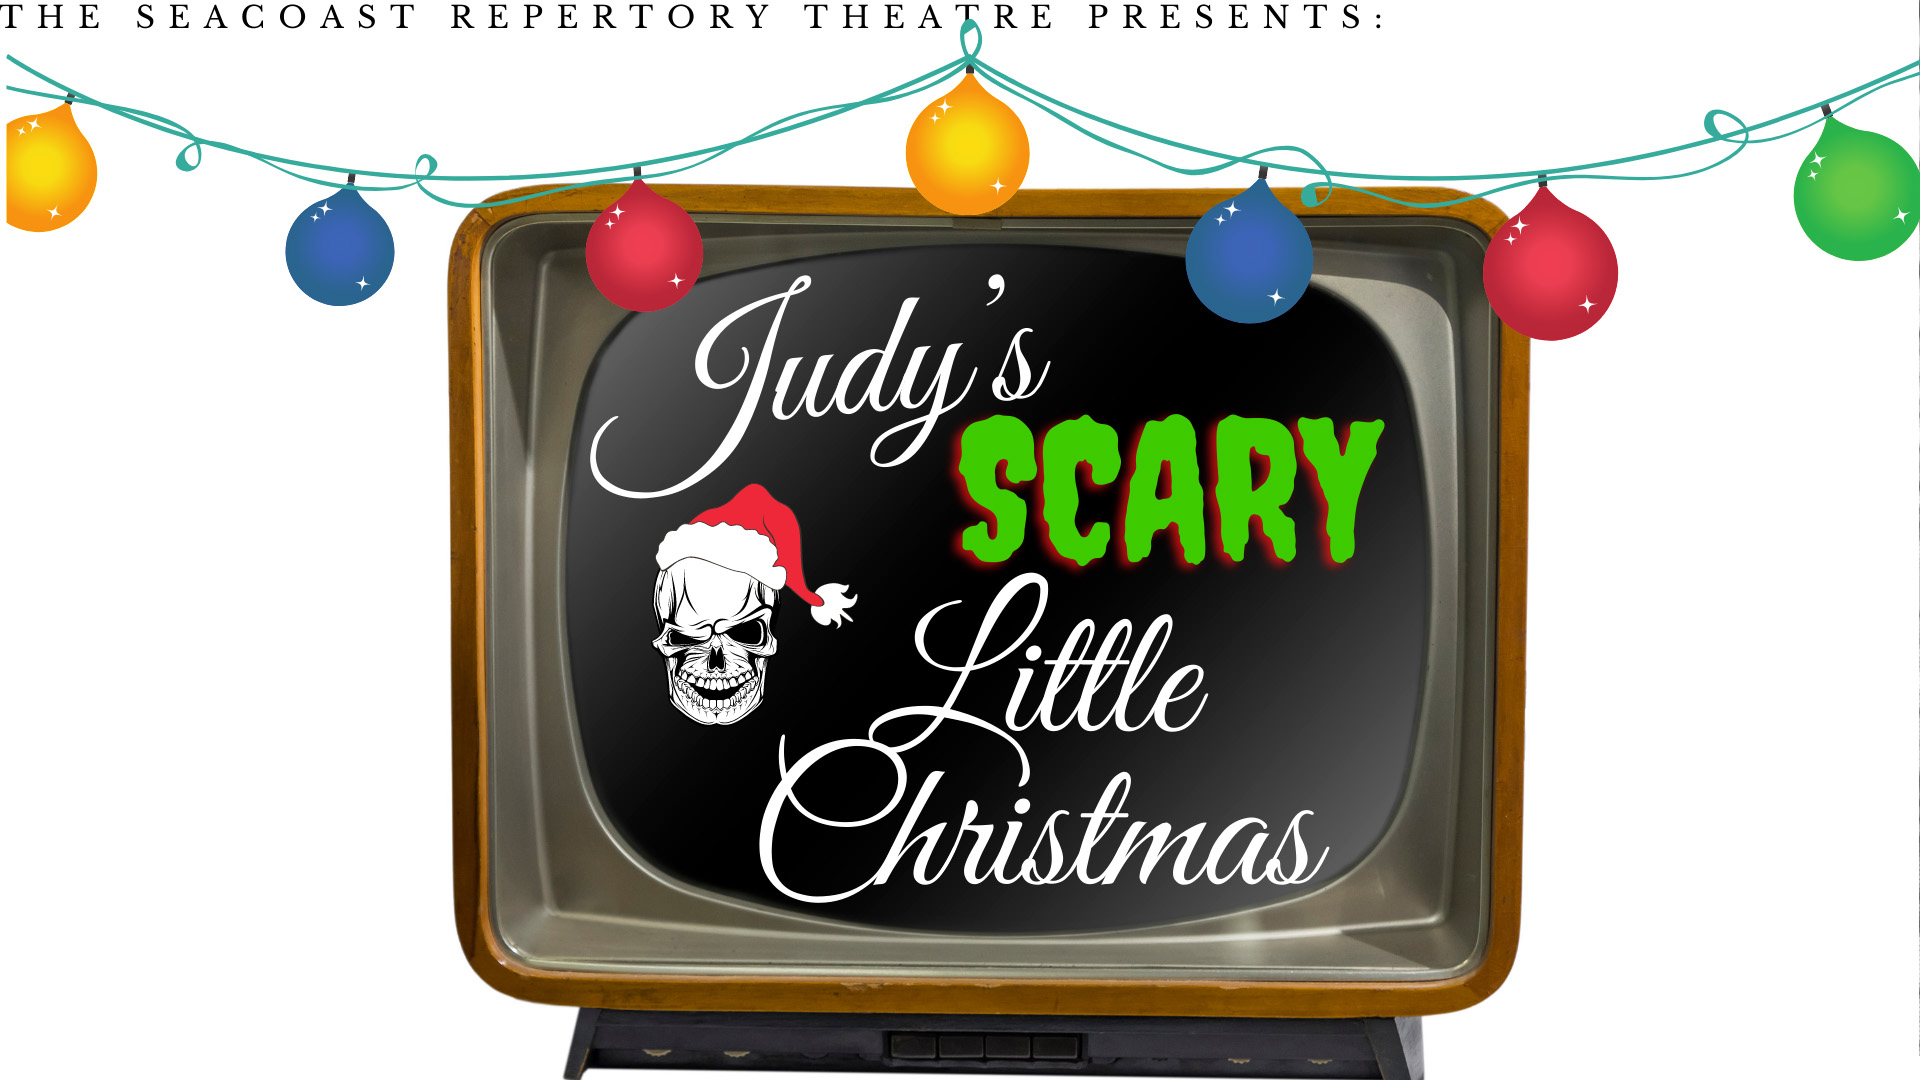 Judy’s Scary Little Christmas